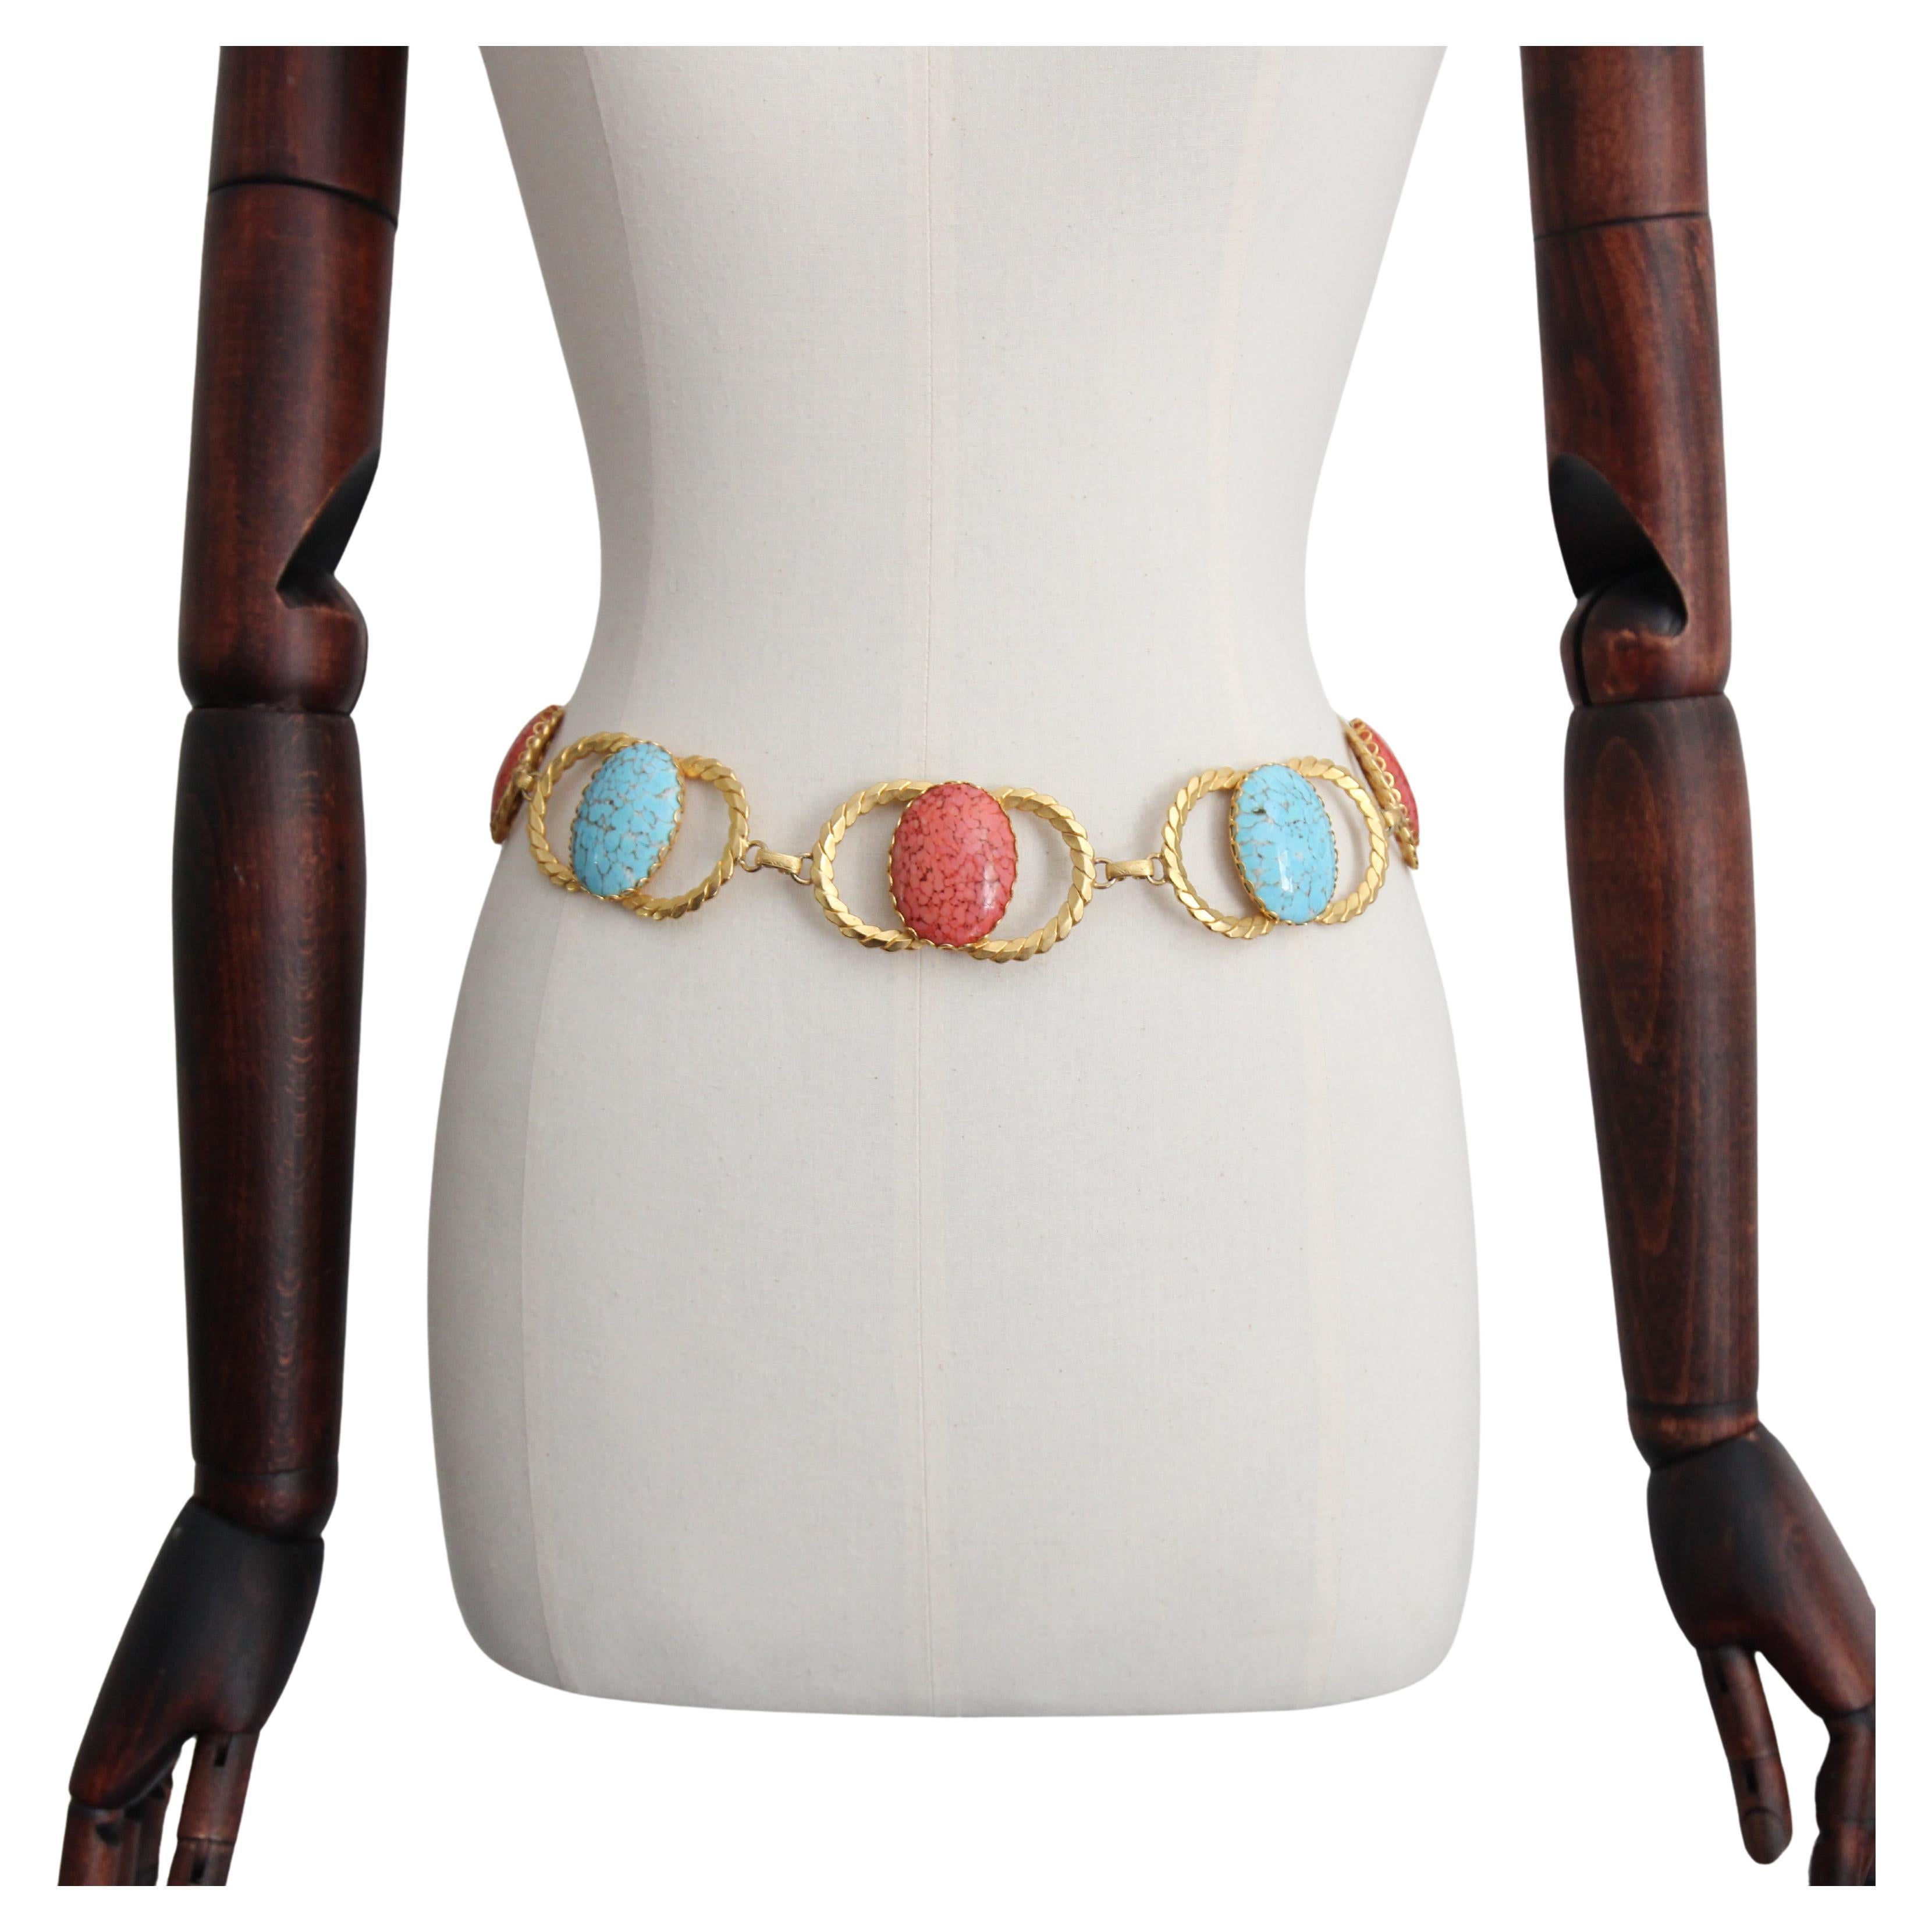 Vintage 1970's coral and turquoise glass cabochons waist chain belt UK 8 US 4 For Sale